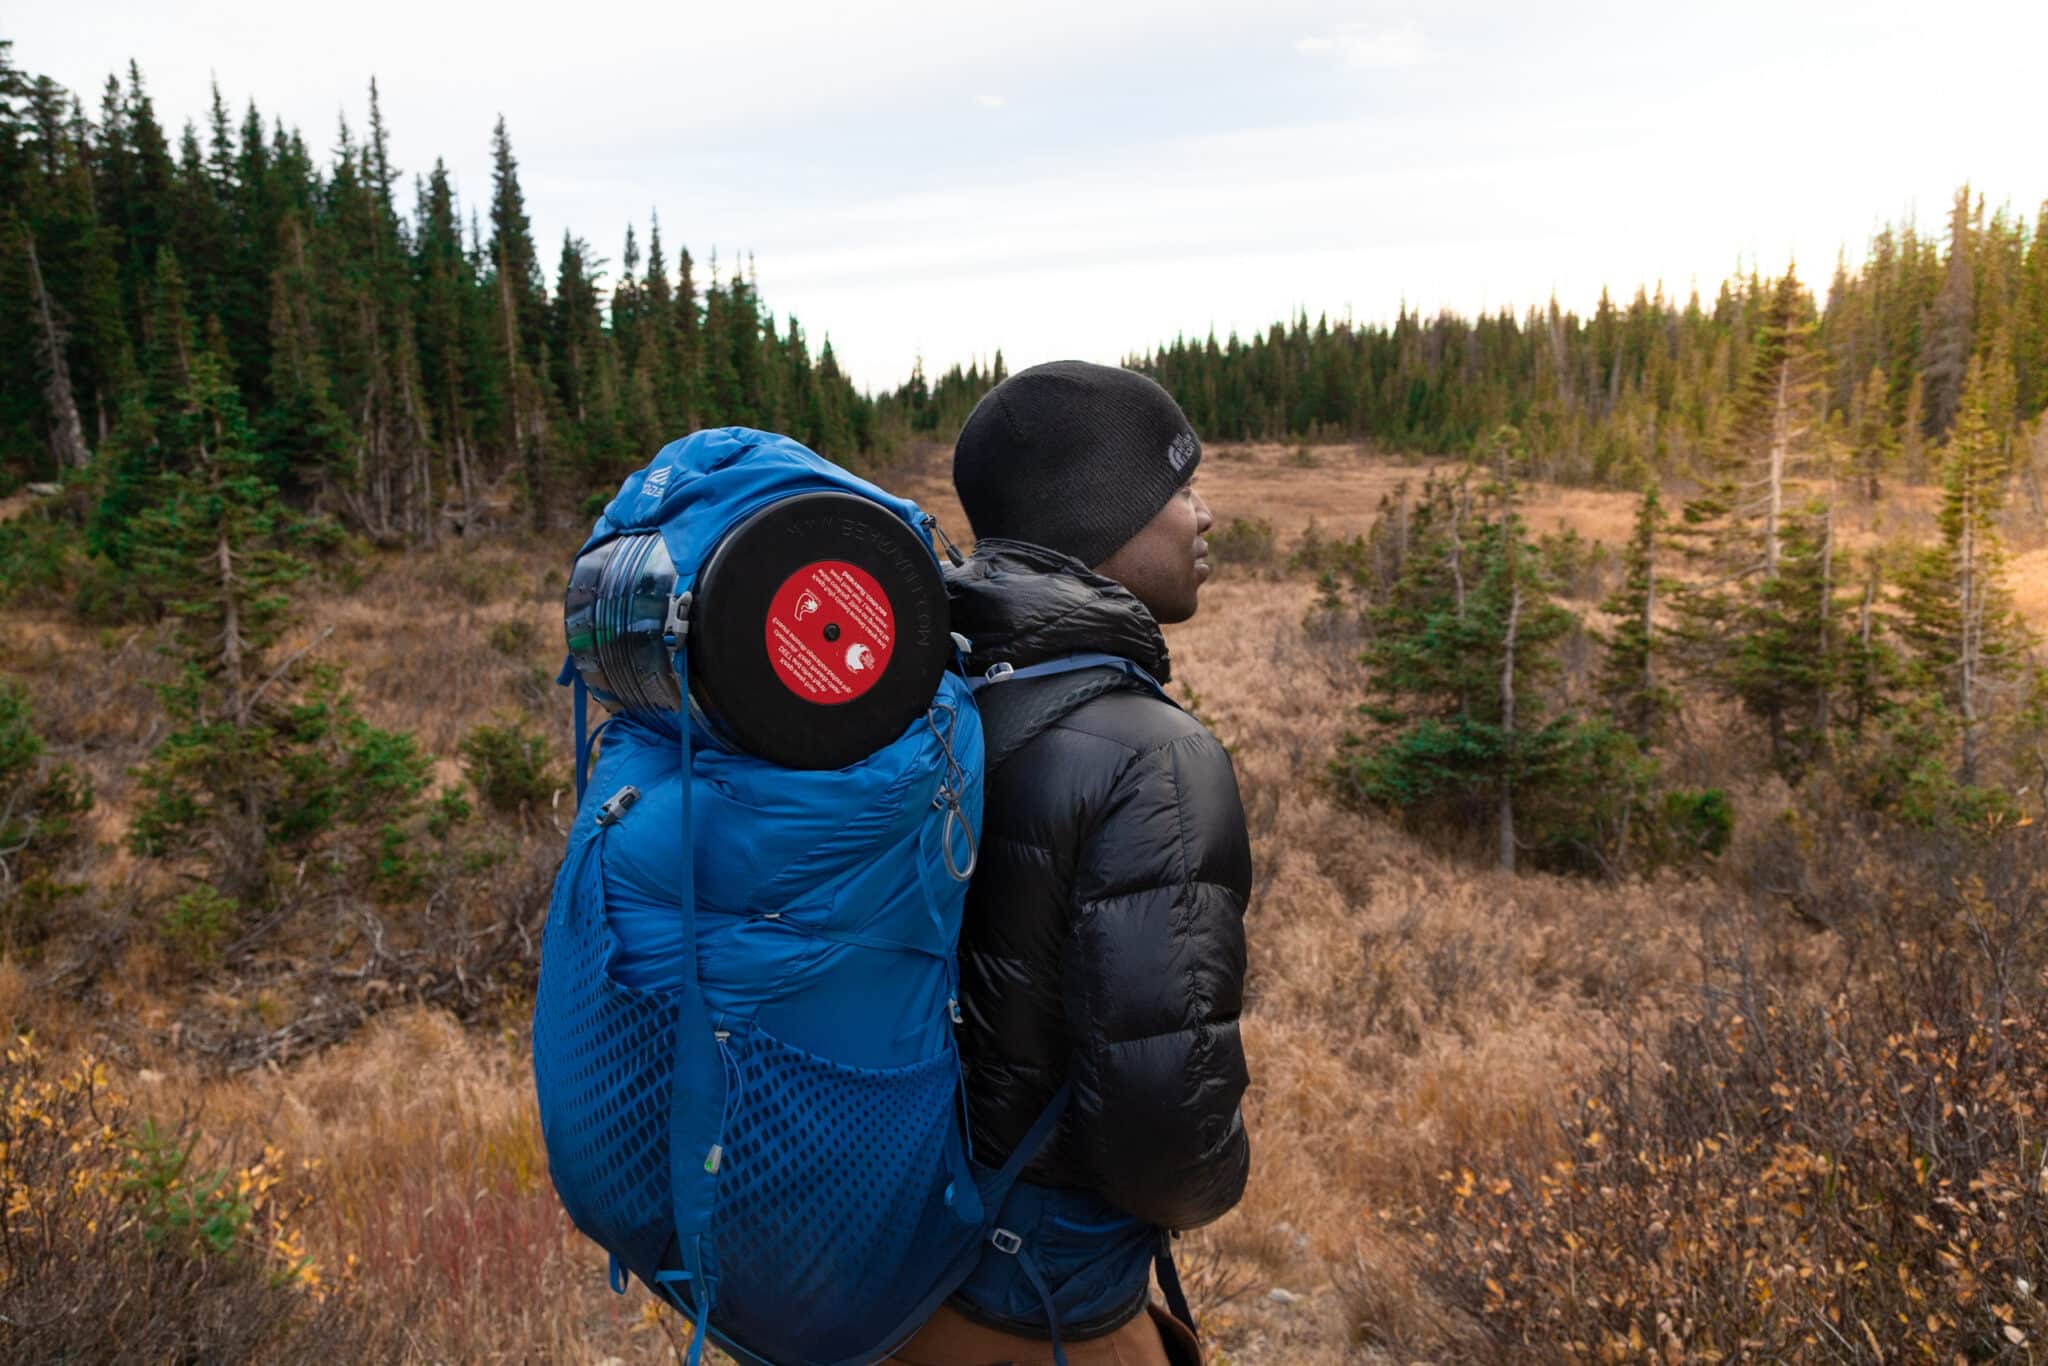 A backpacker looks out over a pine forest on a brisk morning, with a bear canister.